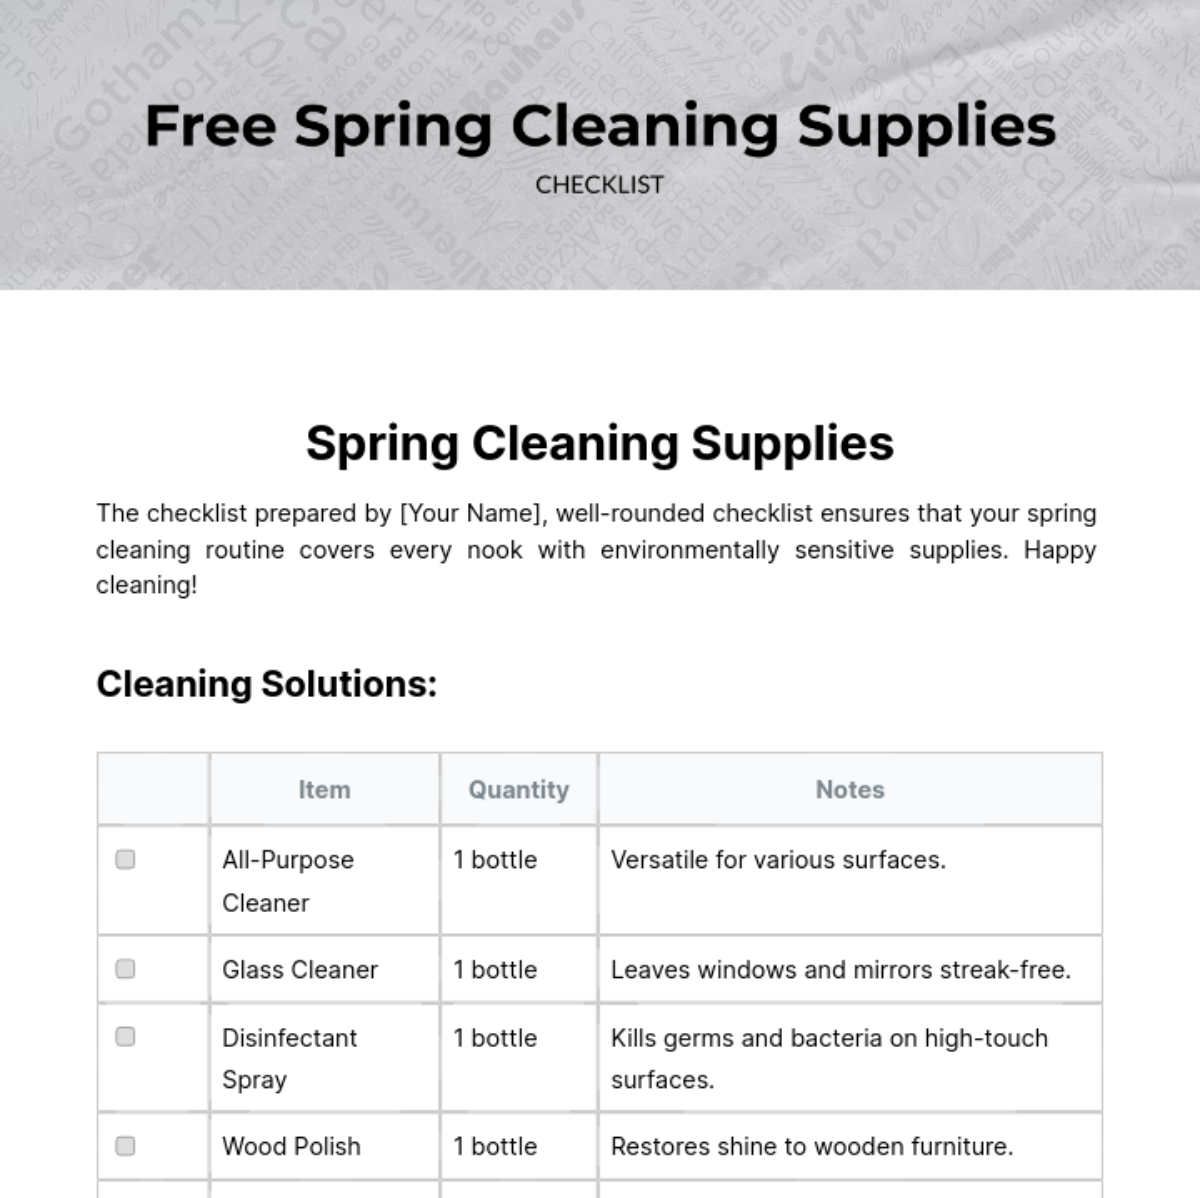 Spring Cleaning Supplies Checklist Template